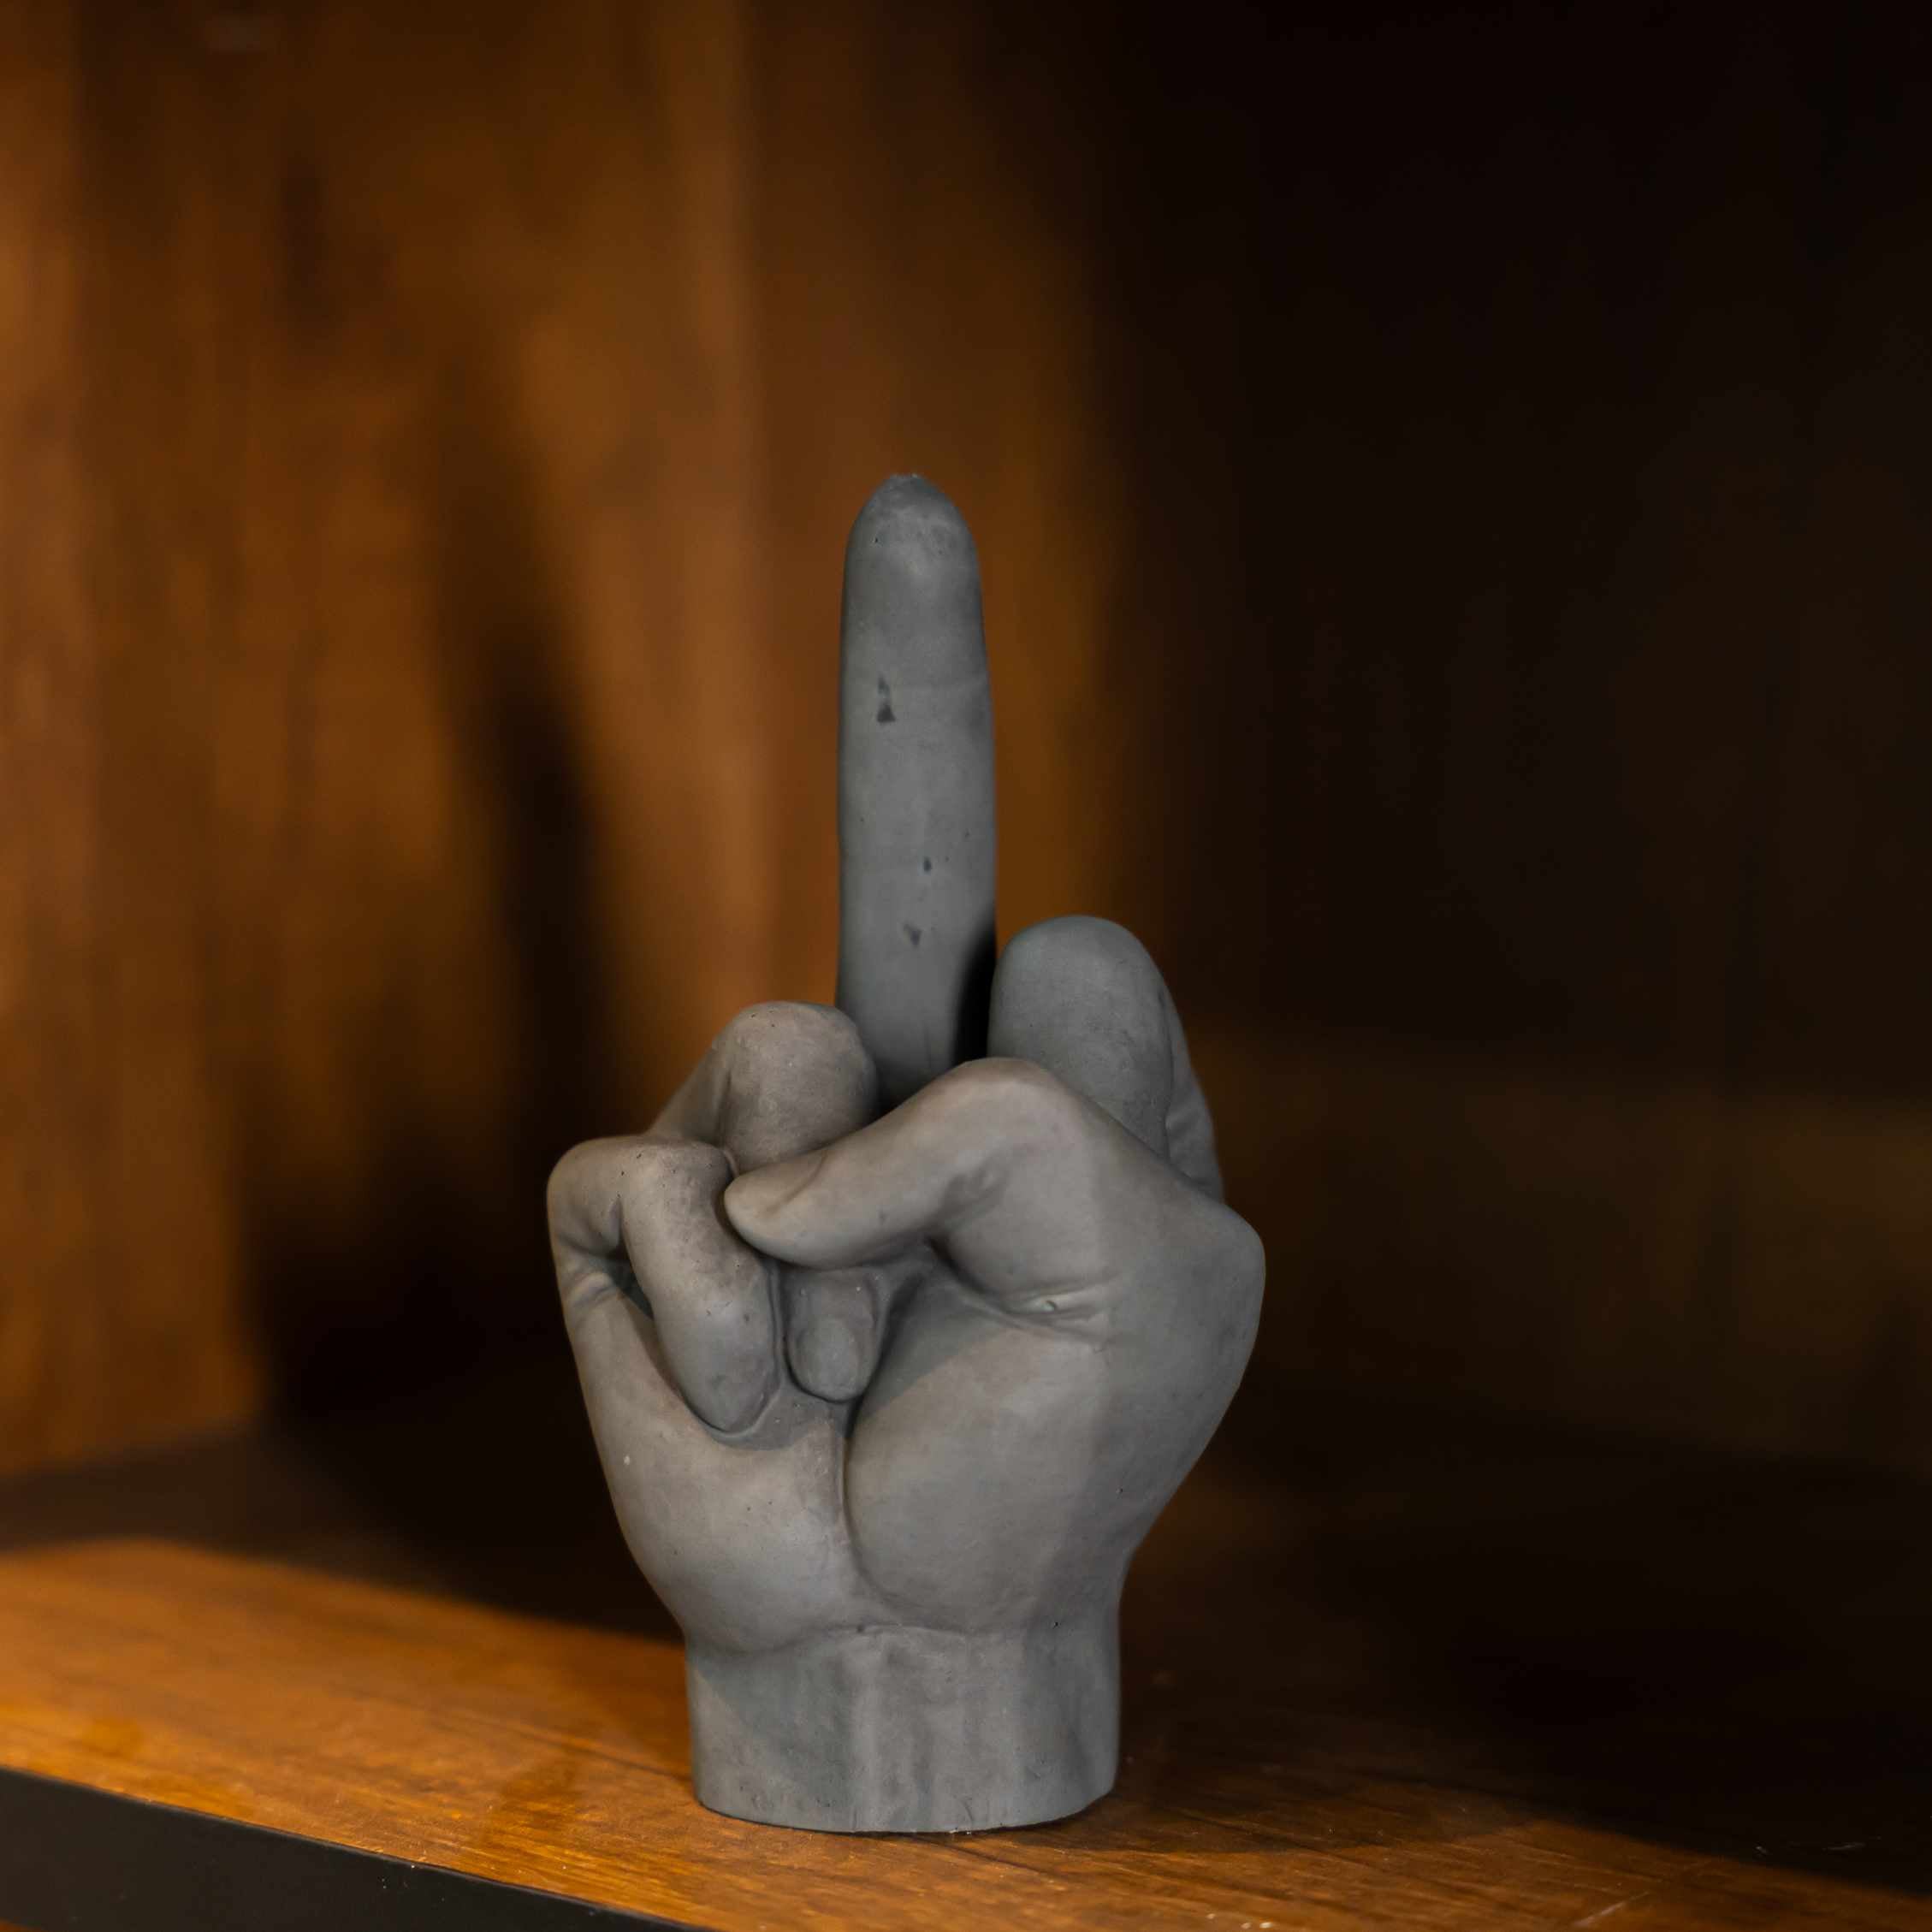 Middle Finger Solid Ceramic Statue Hand | Garden Sculpture or Paperweight  Joke Gifts Funny Gag for Adults | Office Novelty Toys | Desk Decoration